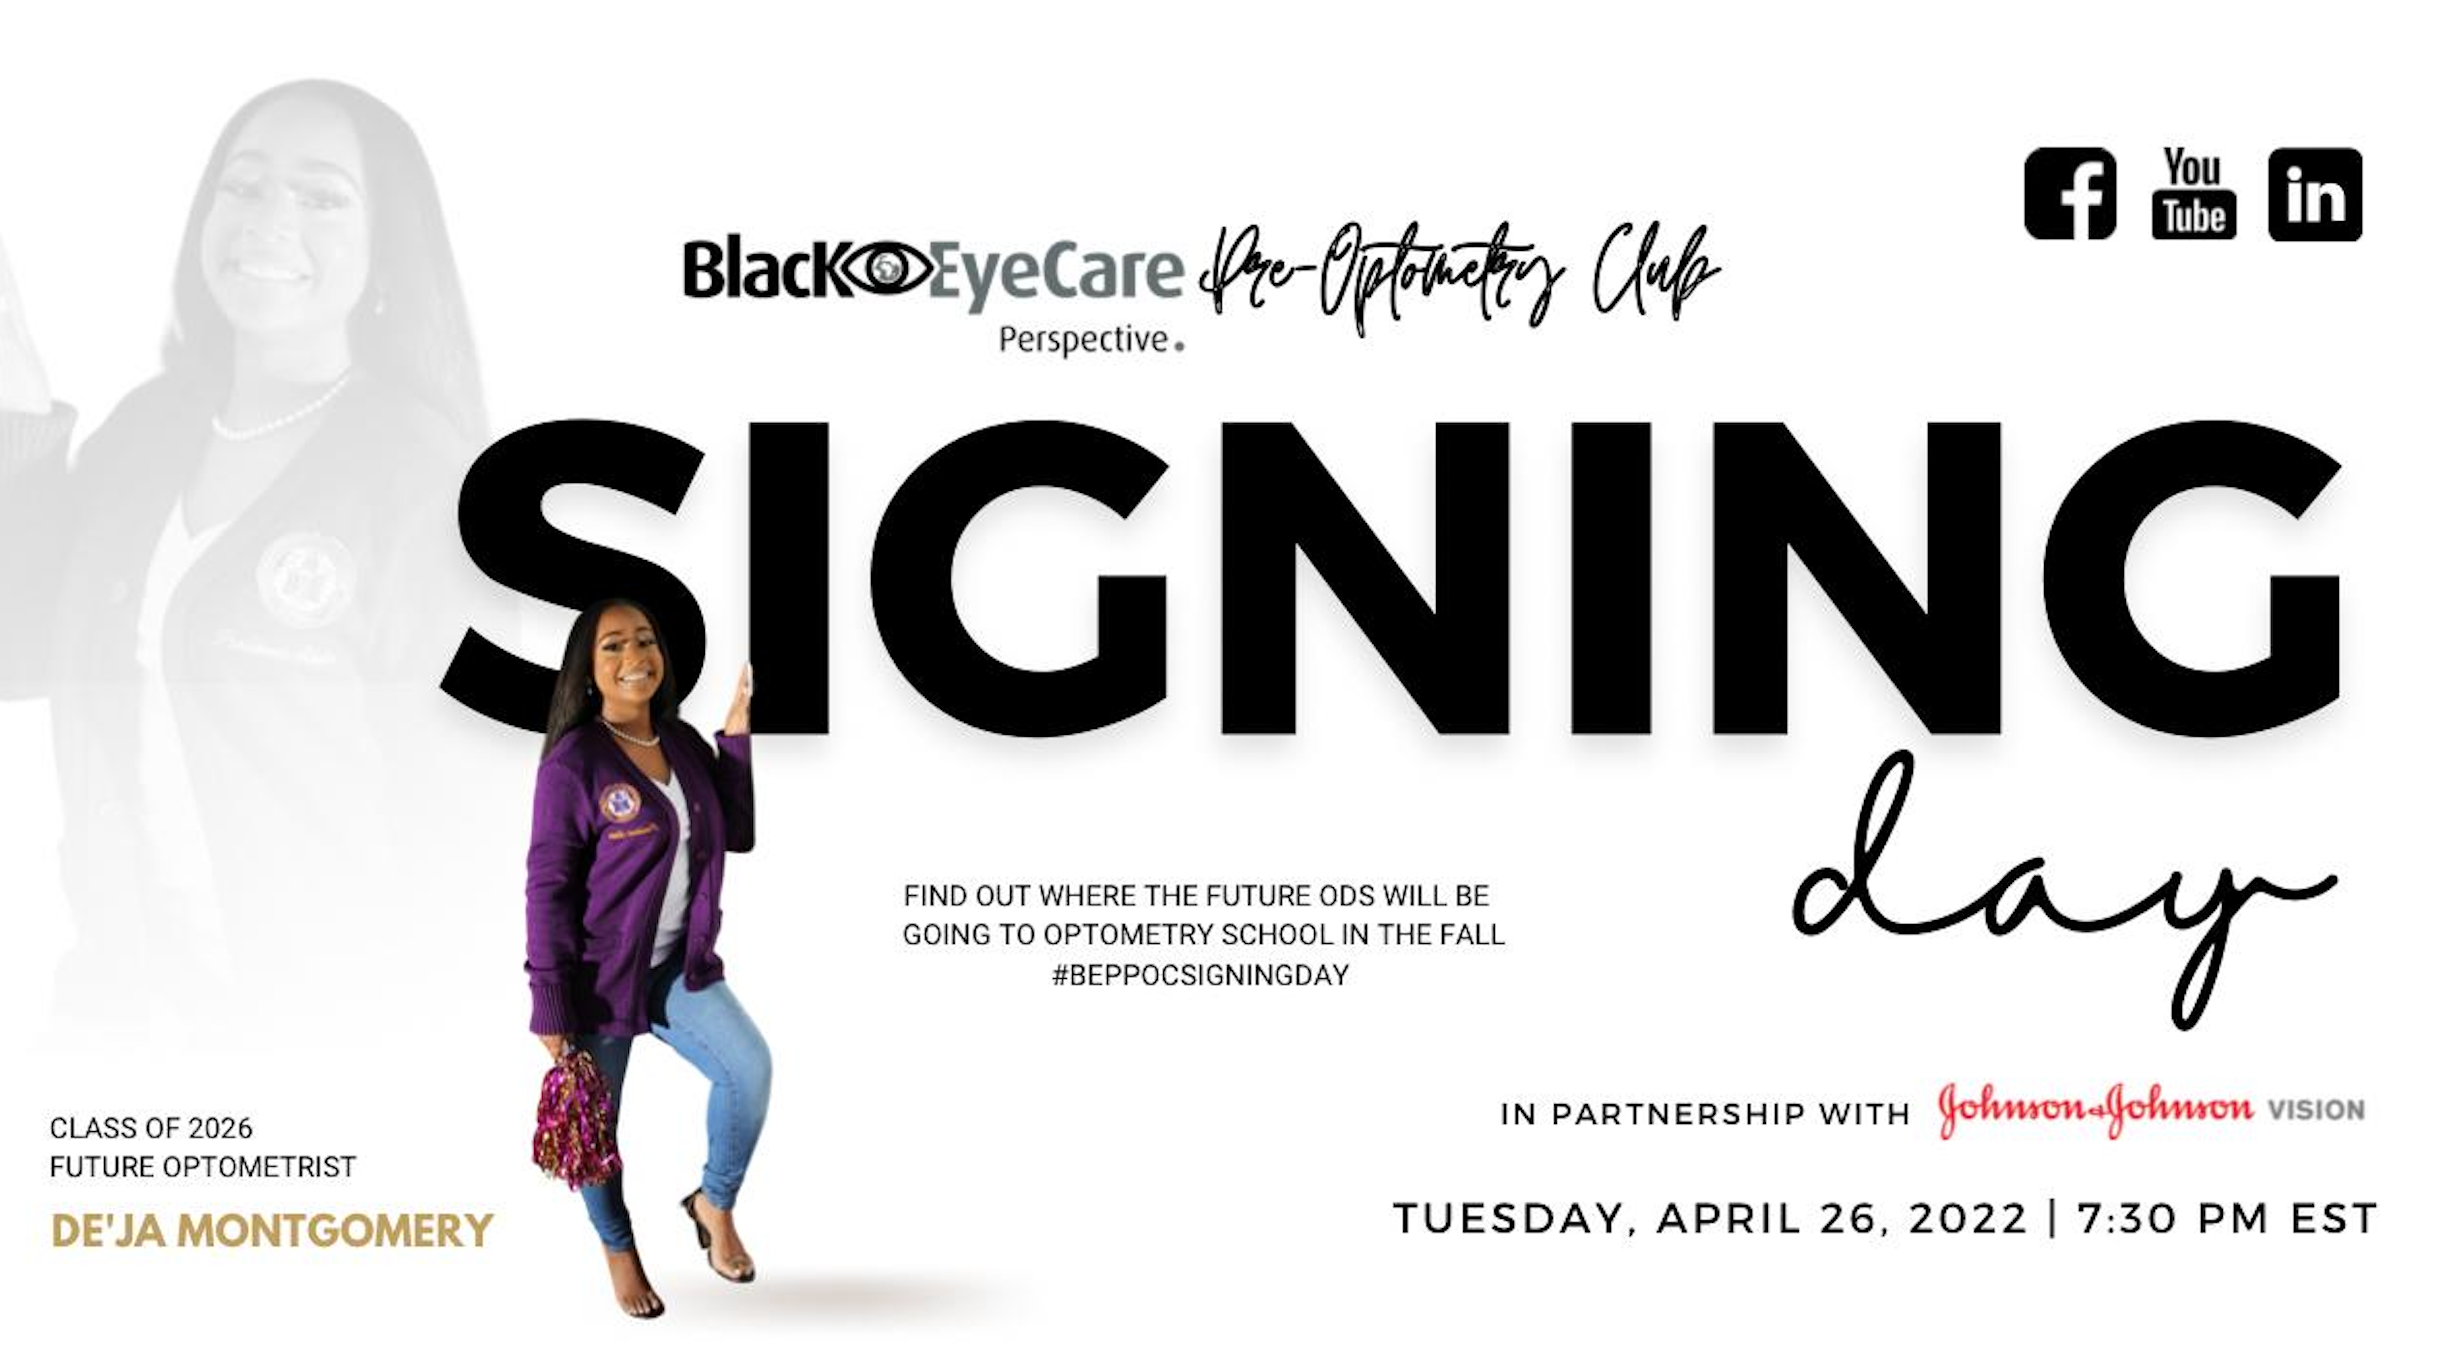 Black EyeCare Perspective to host 2nd annual Signing Day